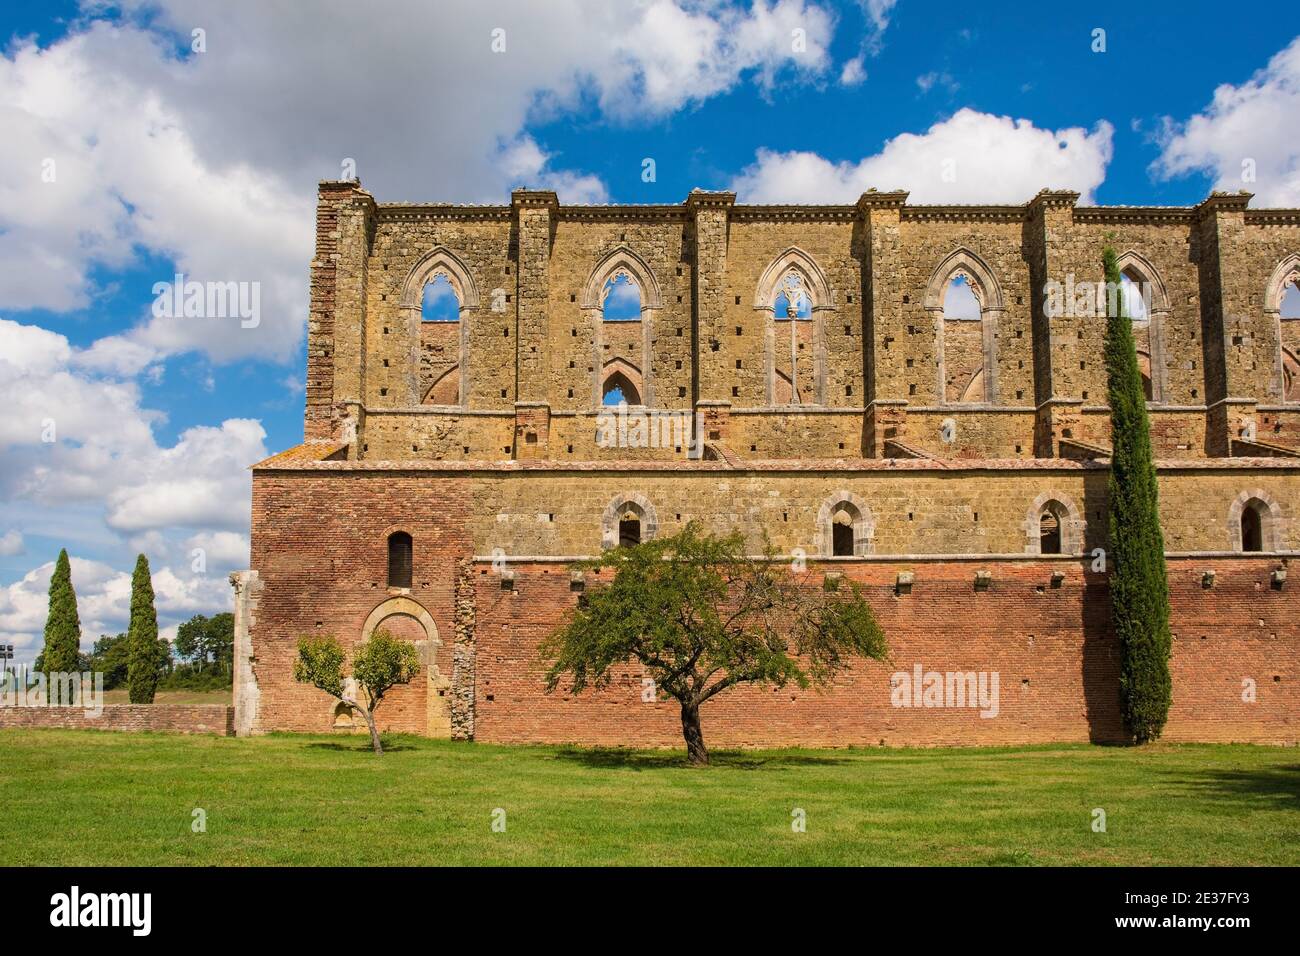 Chiusdino, Italy - 7th September 2020. A side view of the roofless San Galgano Abbey in Siena Province, Tuscany, showing lancet or pointed arch window Stock Photo